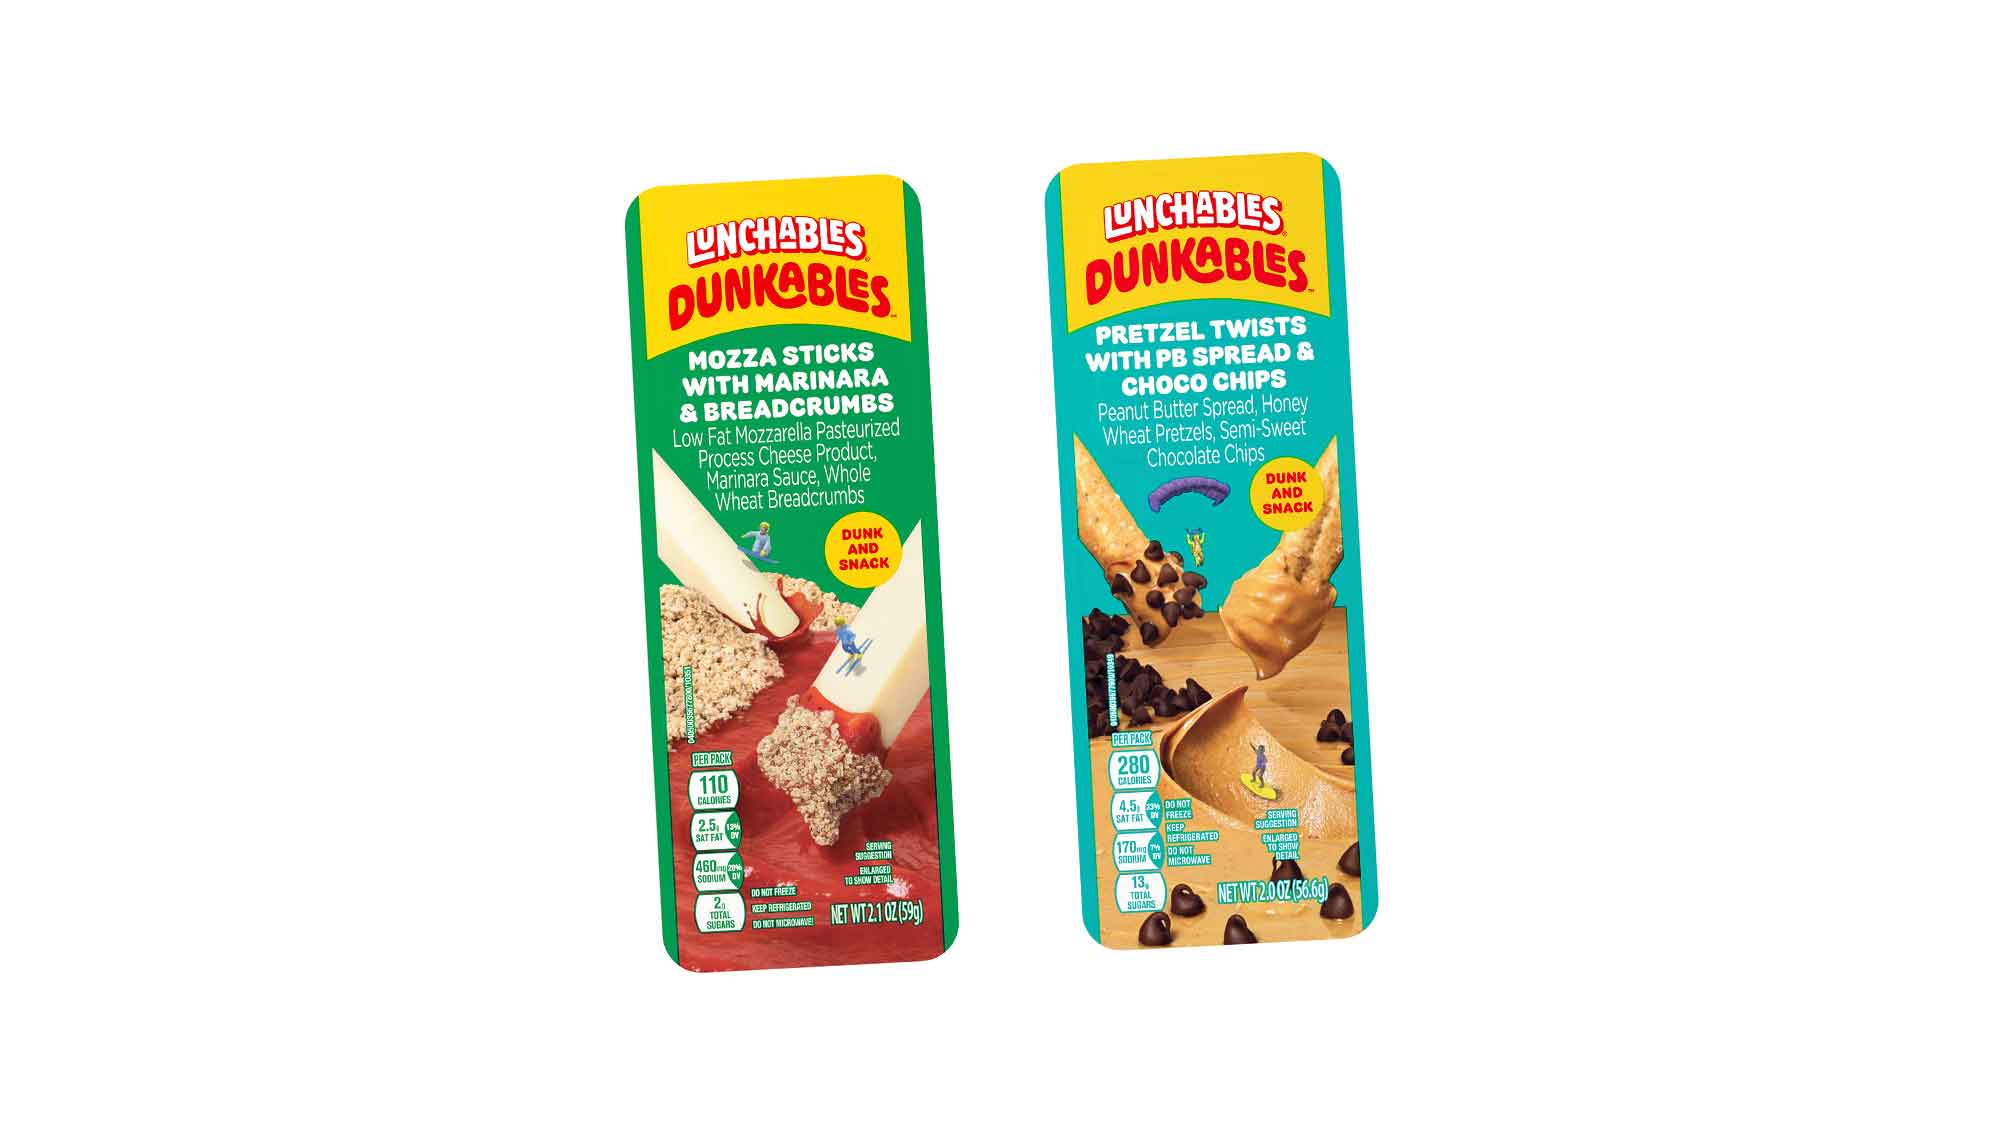 From Mozzarella Submarines to Pretzel Swords, Lunchables Brings Snack Time to New Heights with the Debut of New Dunkables